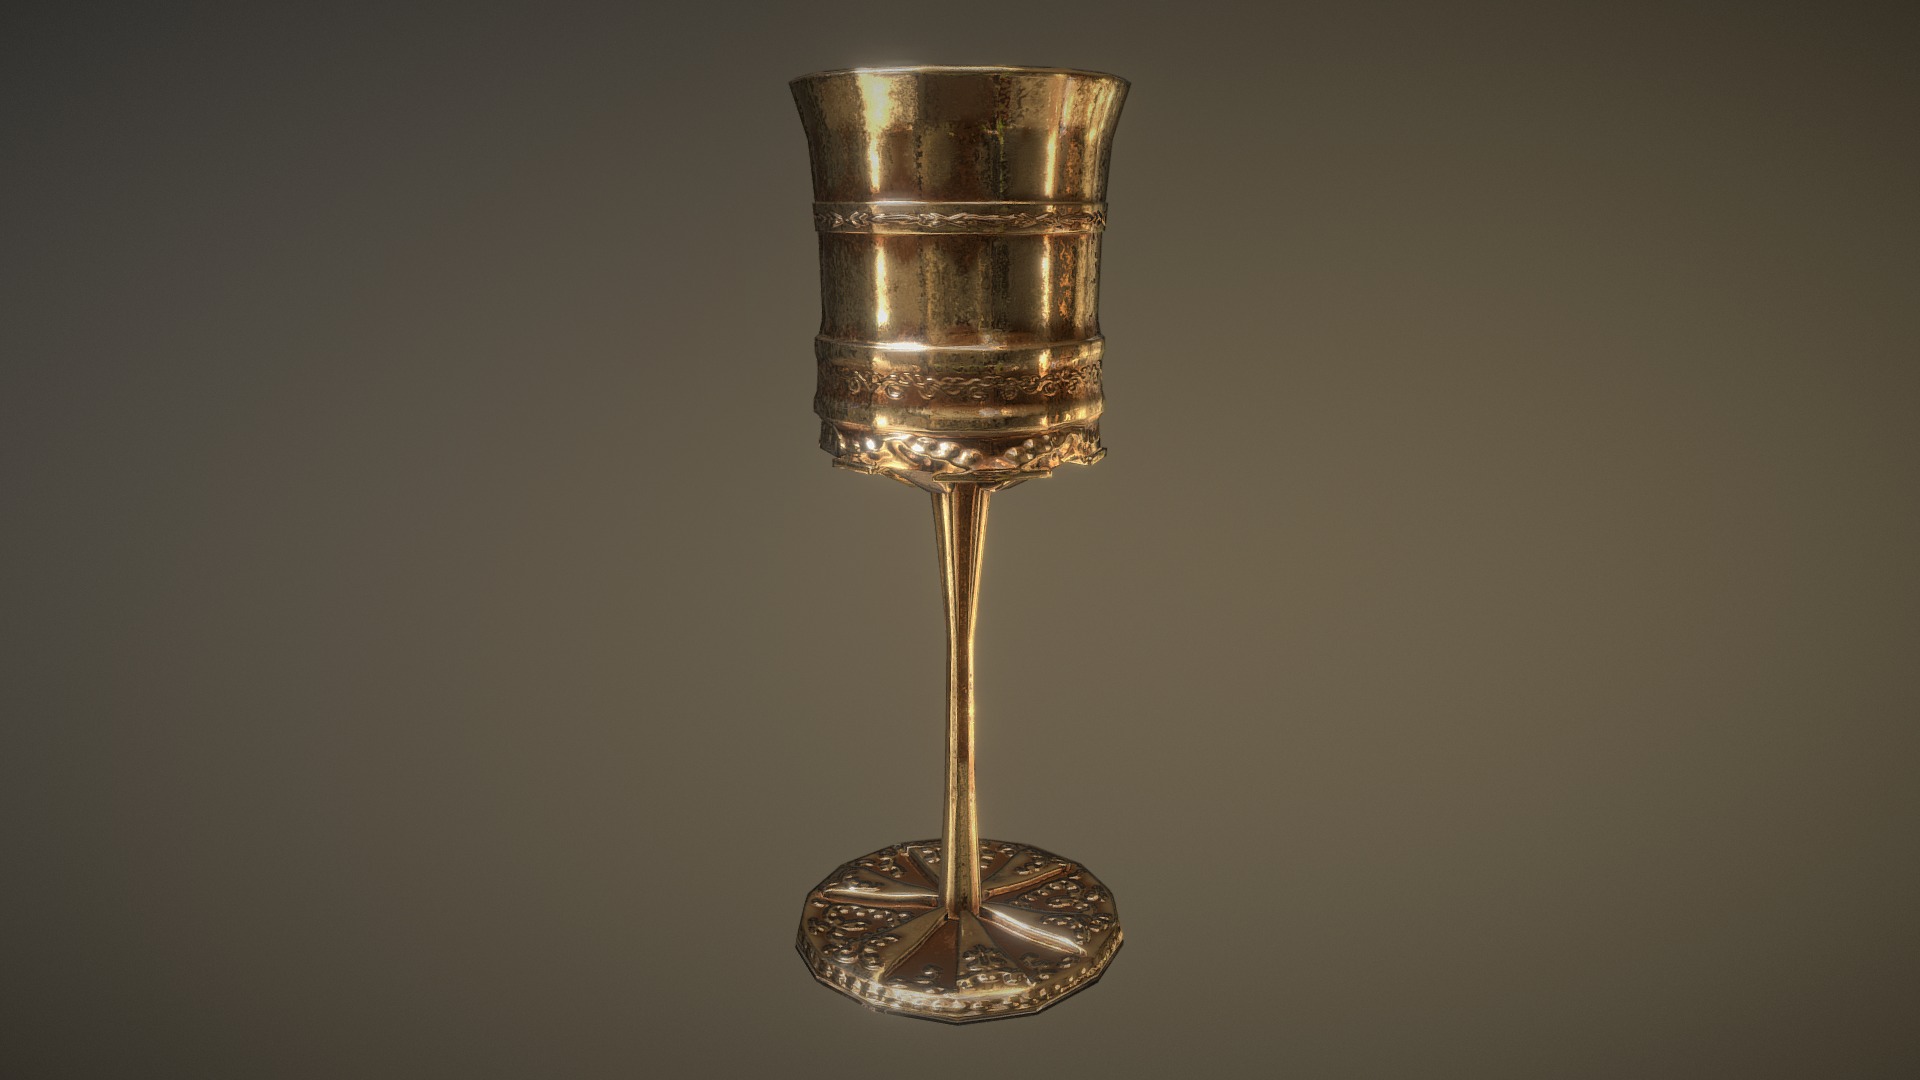 3D model Trinket with Ornaments - This is a 3D model of the Trinket with Ornaments. The 3D model is about a glass with a gold rim.